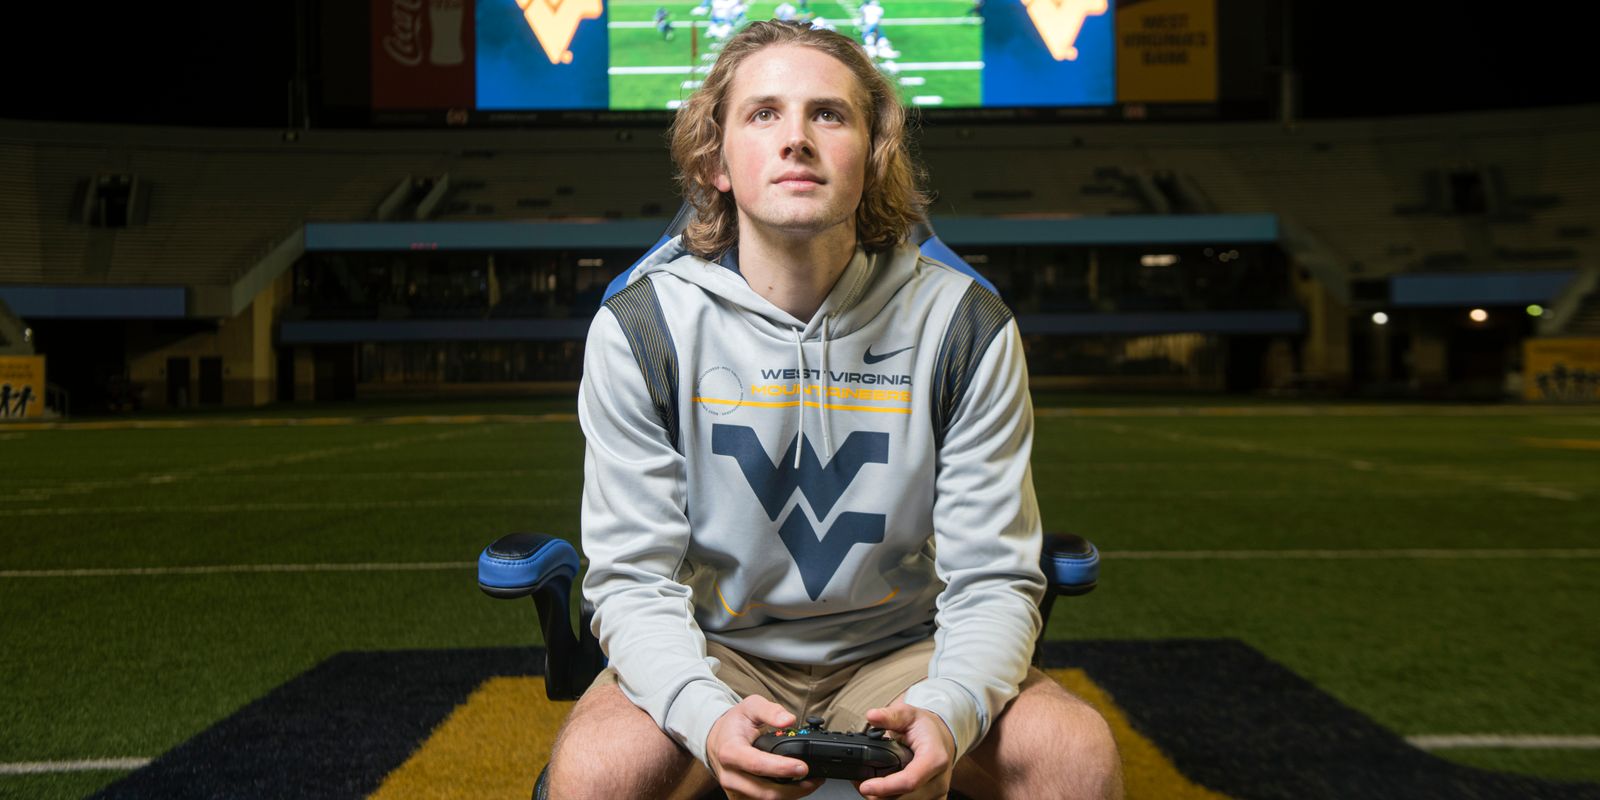 young man, seated, flying WV shirt, game controller, big screen in background